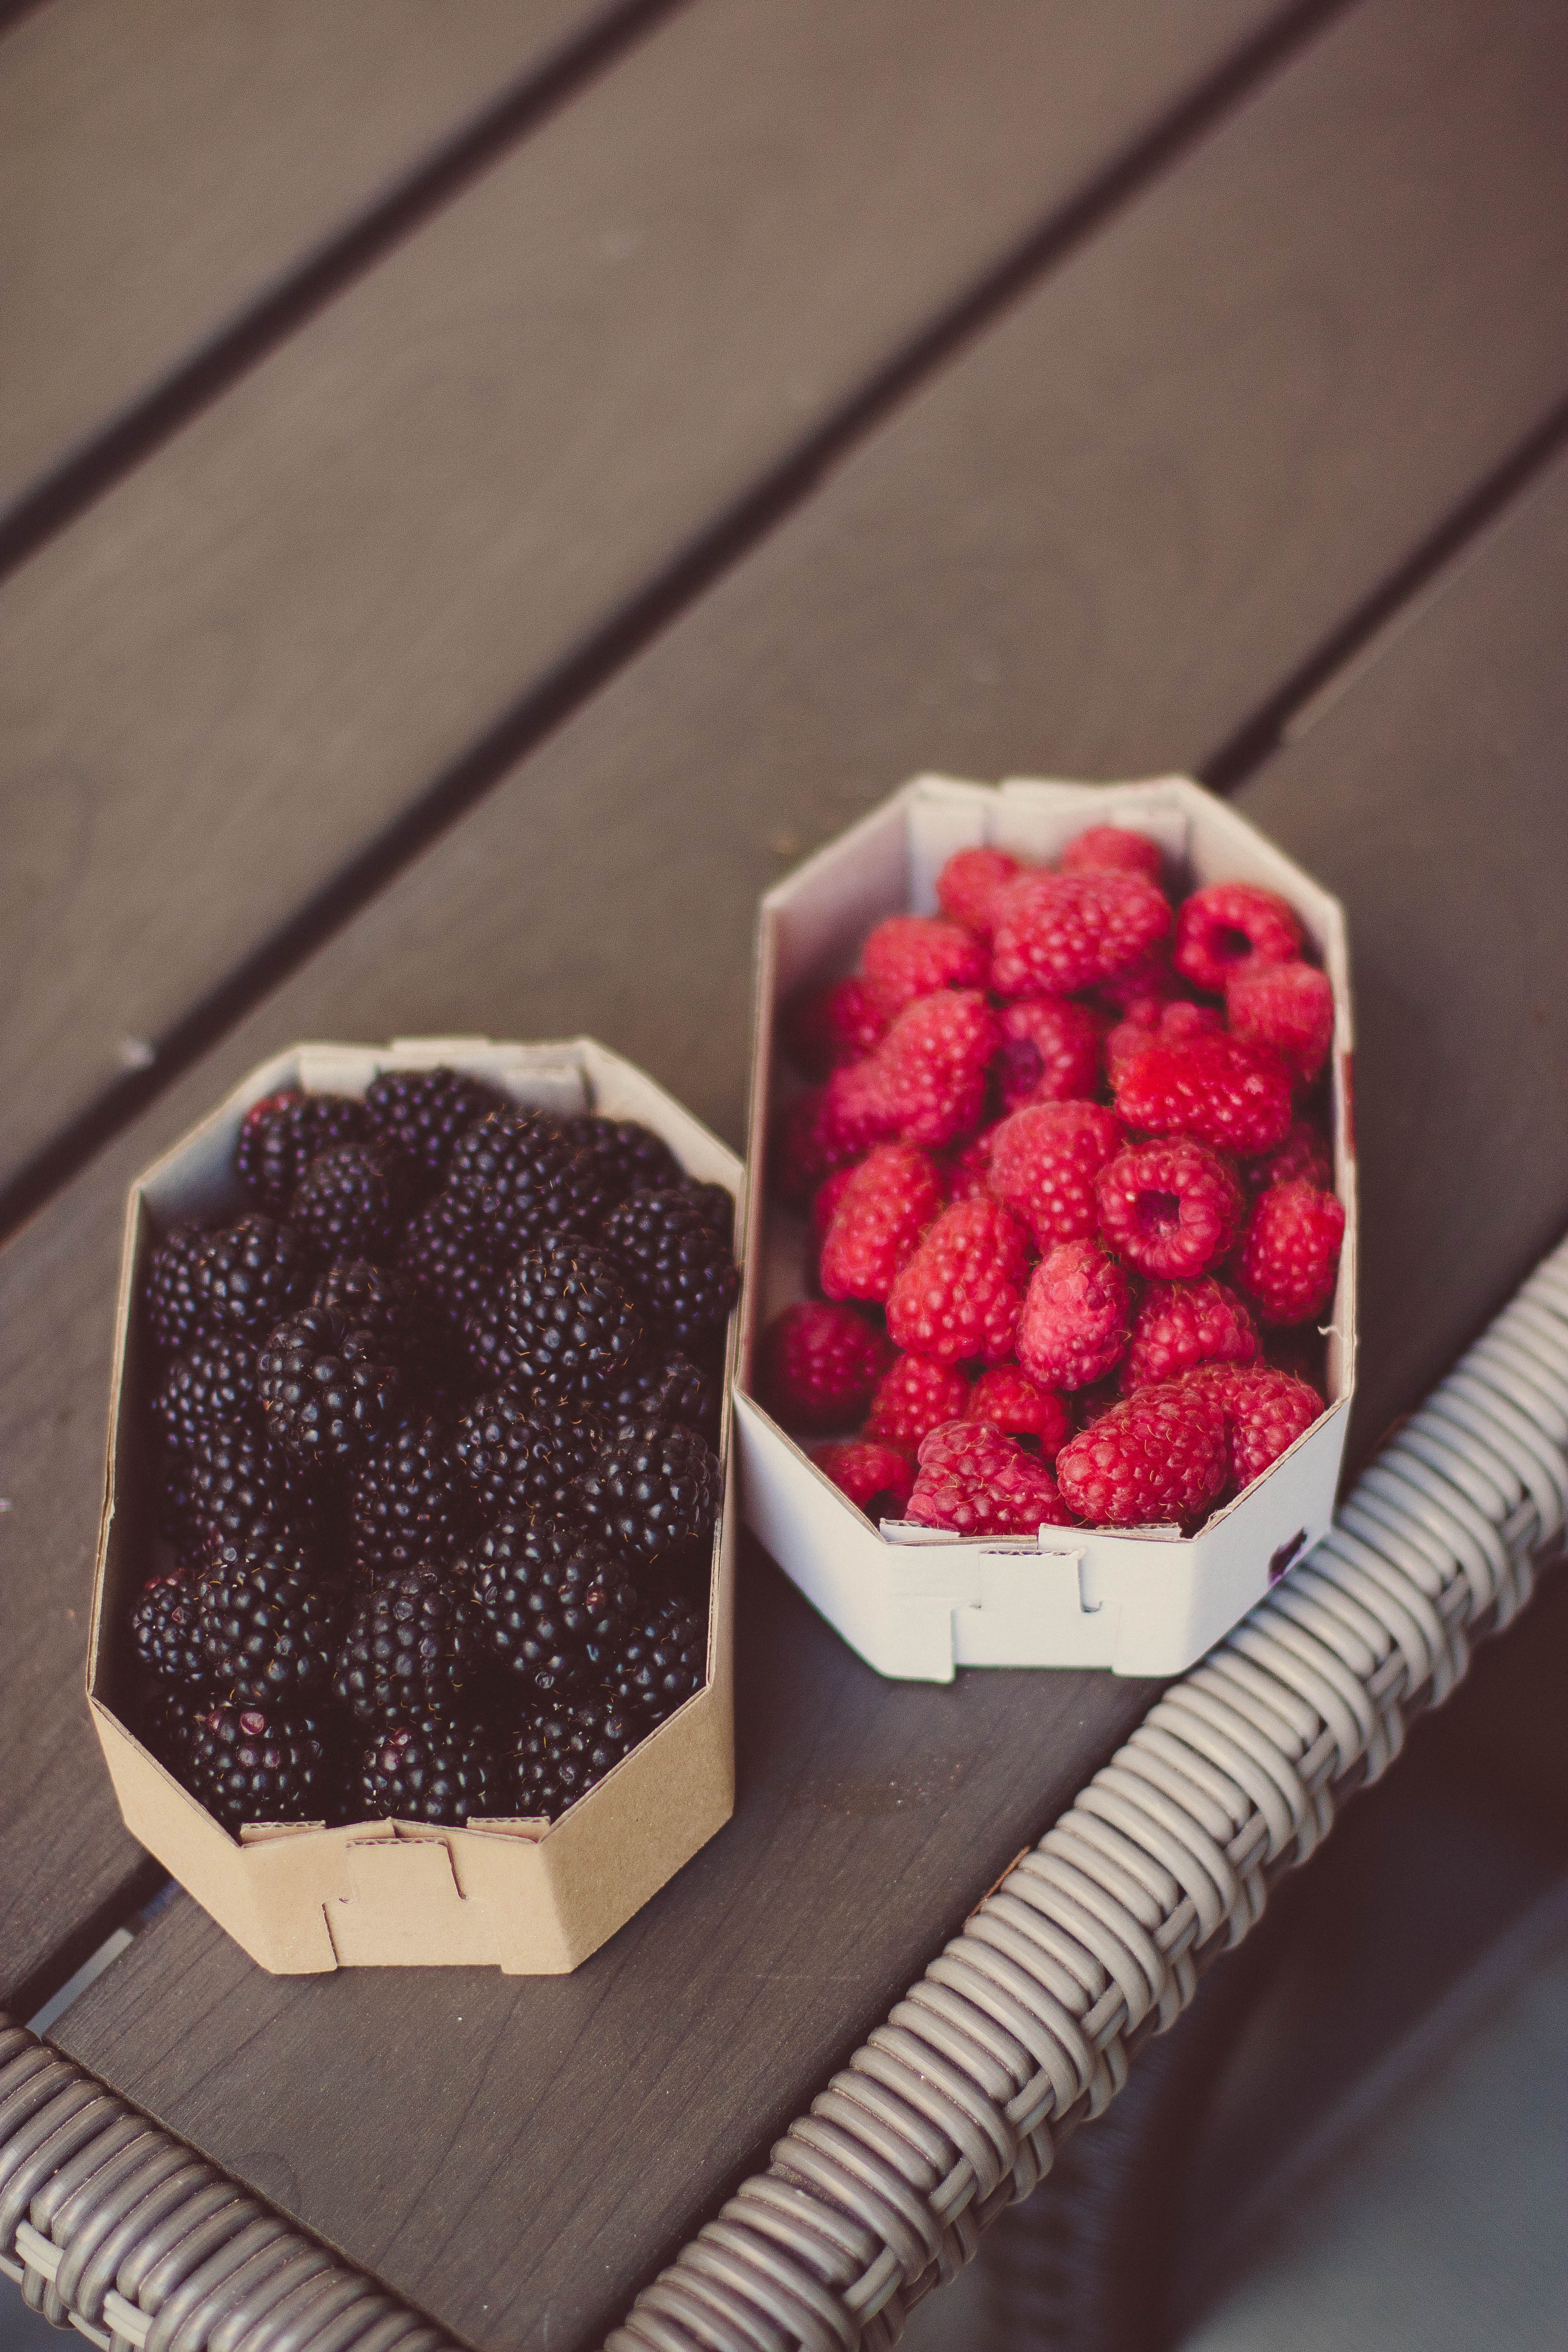 Raspberries and blueberries on top of table photo